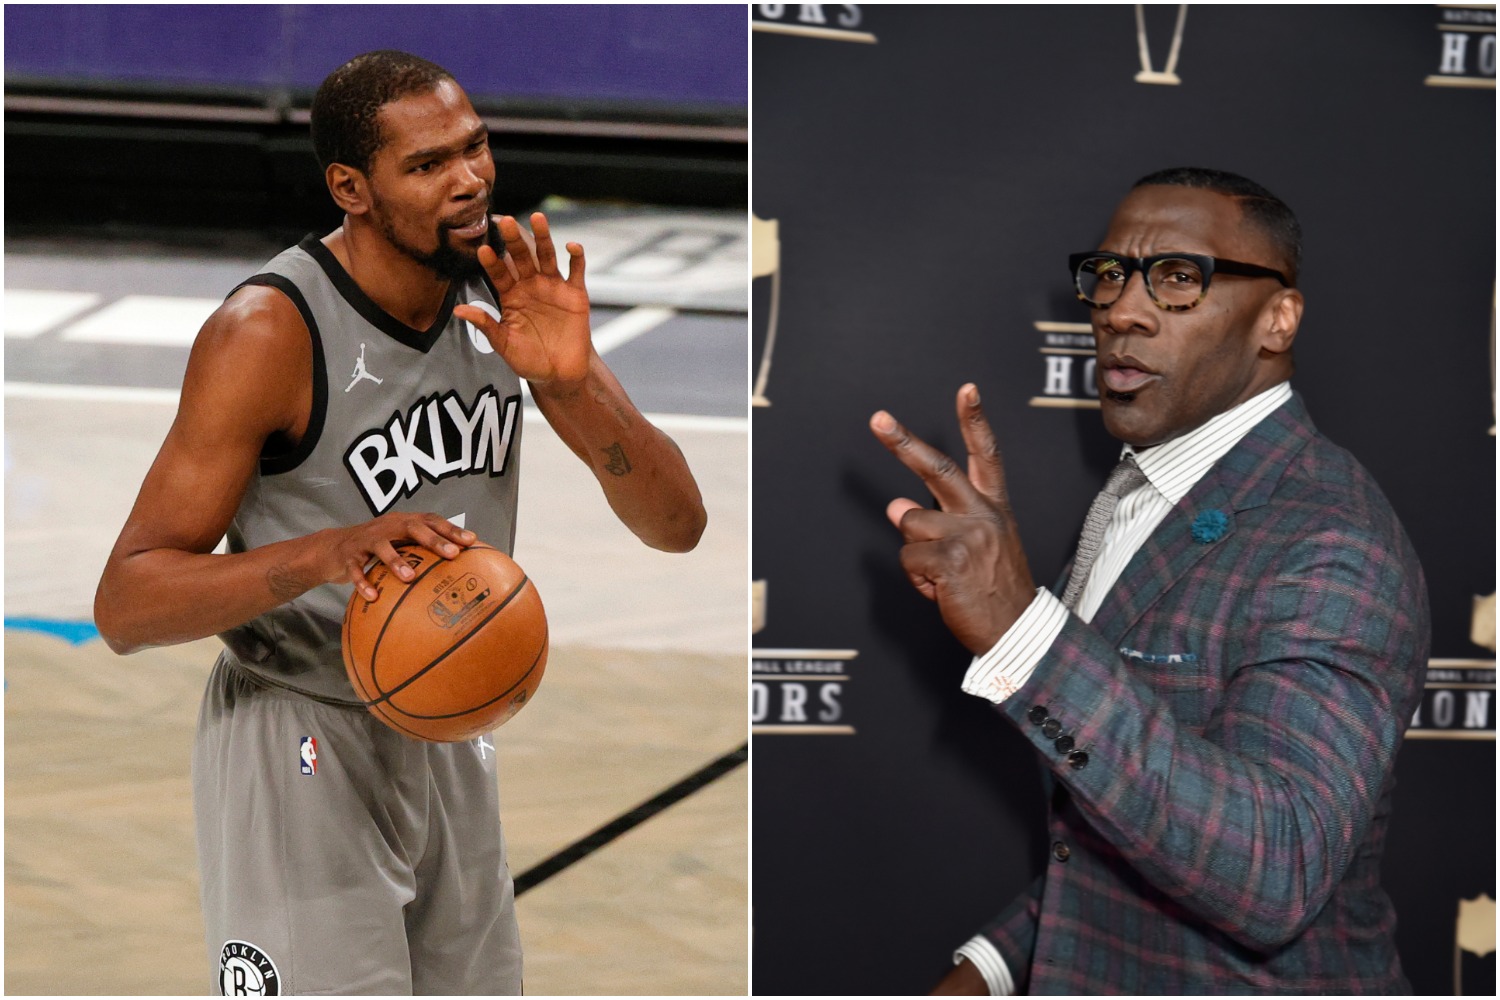 Brooklyn Nets star Kevin Durant pictured next to former NFL tight end Shannon Sharpe.